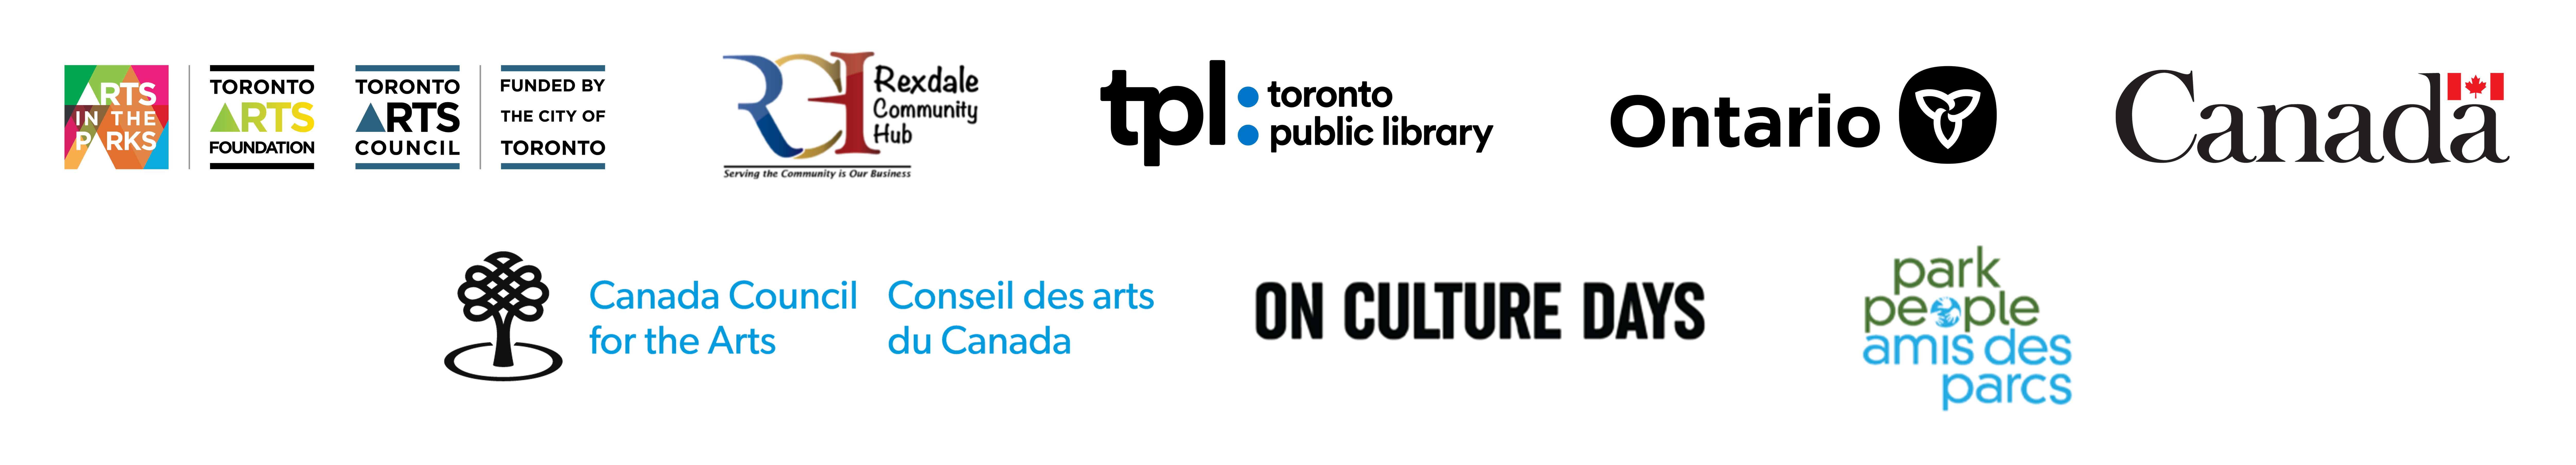 Logo banner with logos from Arts in the Parks, Toronto Arts Council, Toronto Arts Foundation, Rexdale Community Hub, Toronto Public Library, Government of Ontario, Government of Canada, Canada Council for the Arts, Ontario Culture Days and Park People.